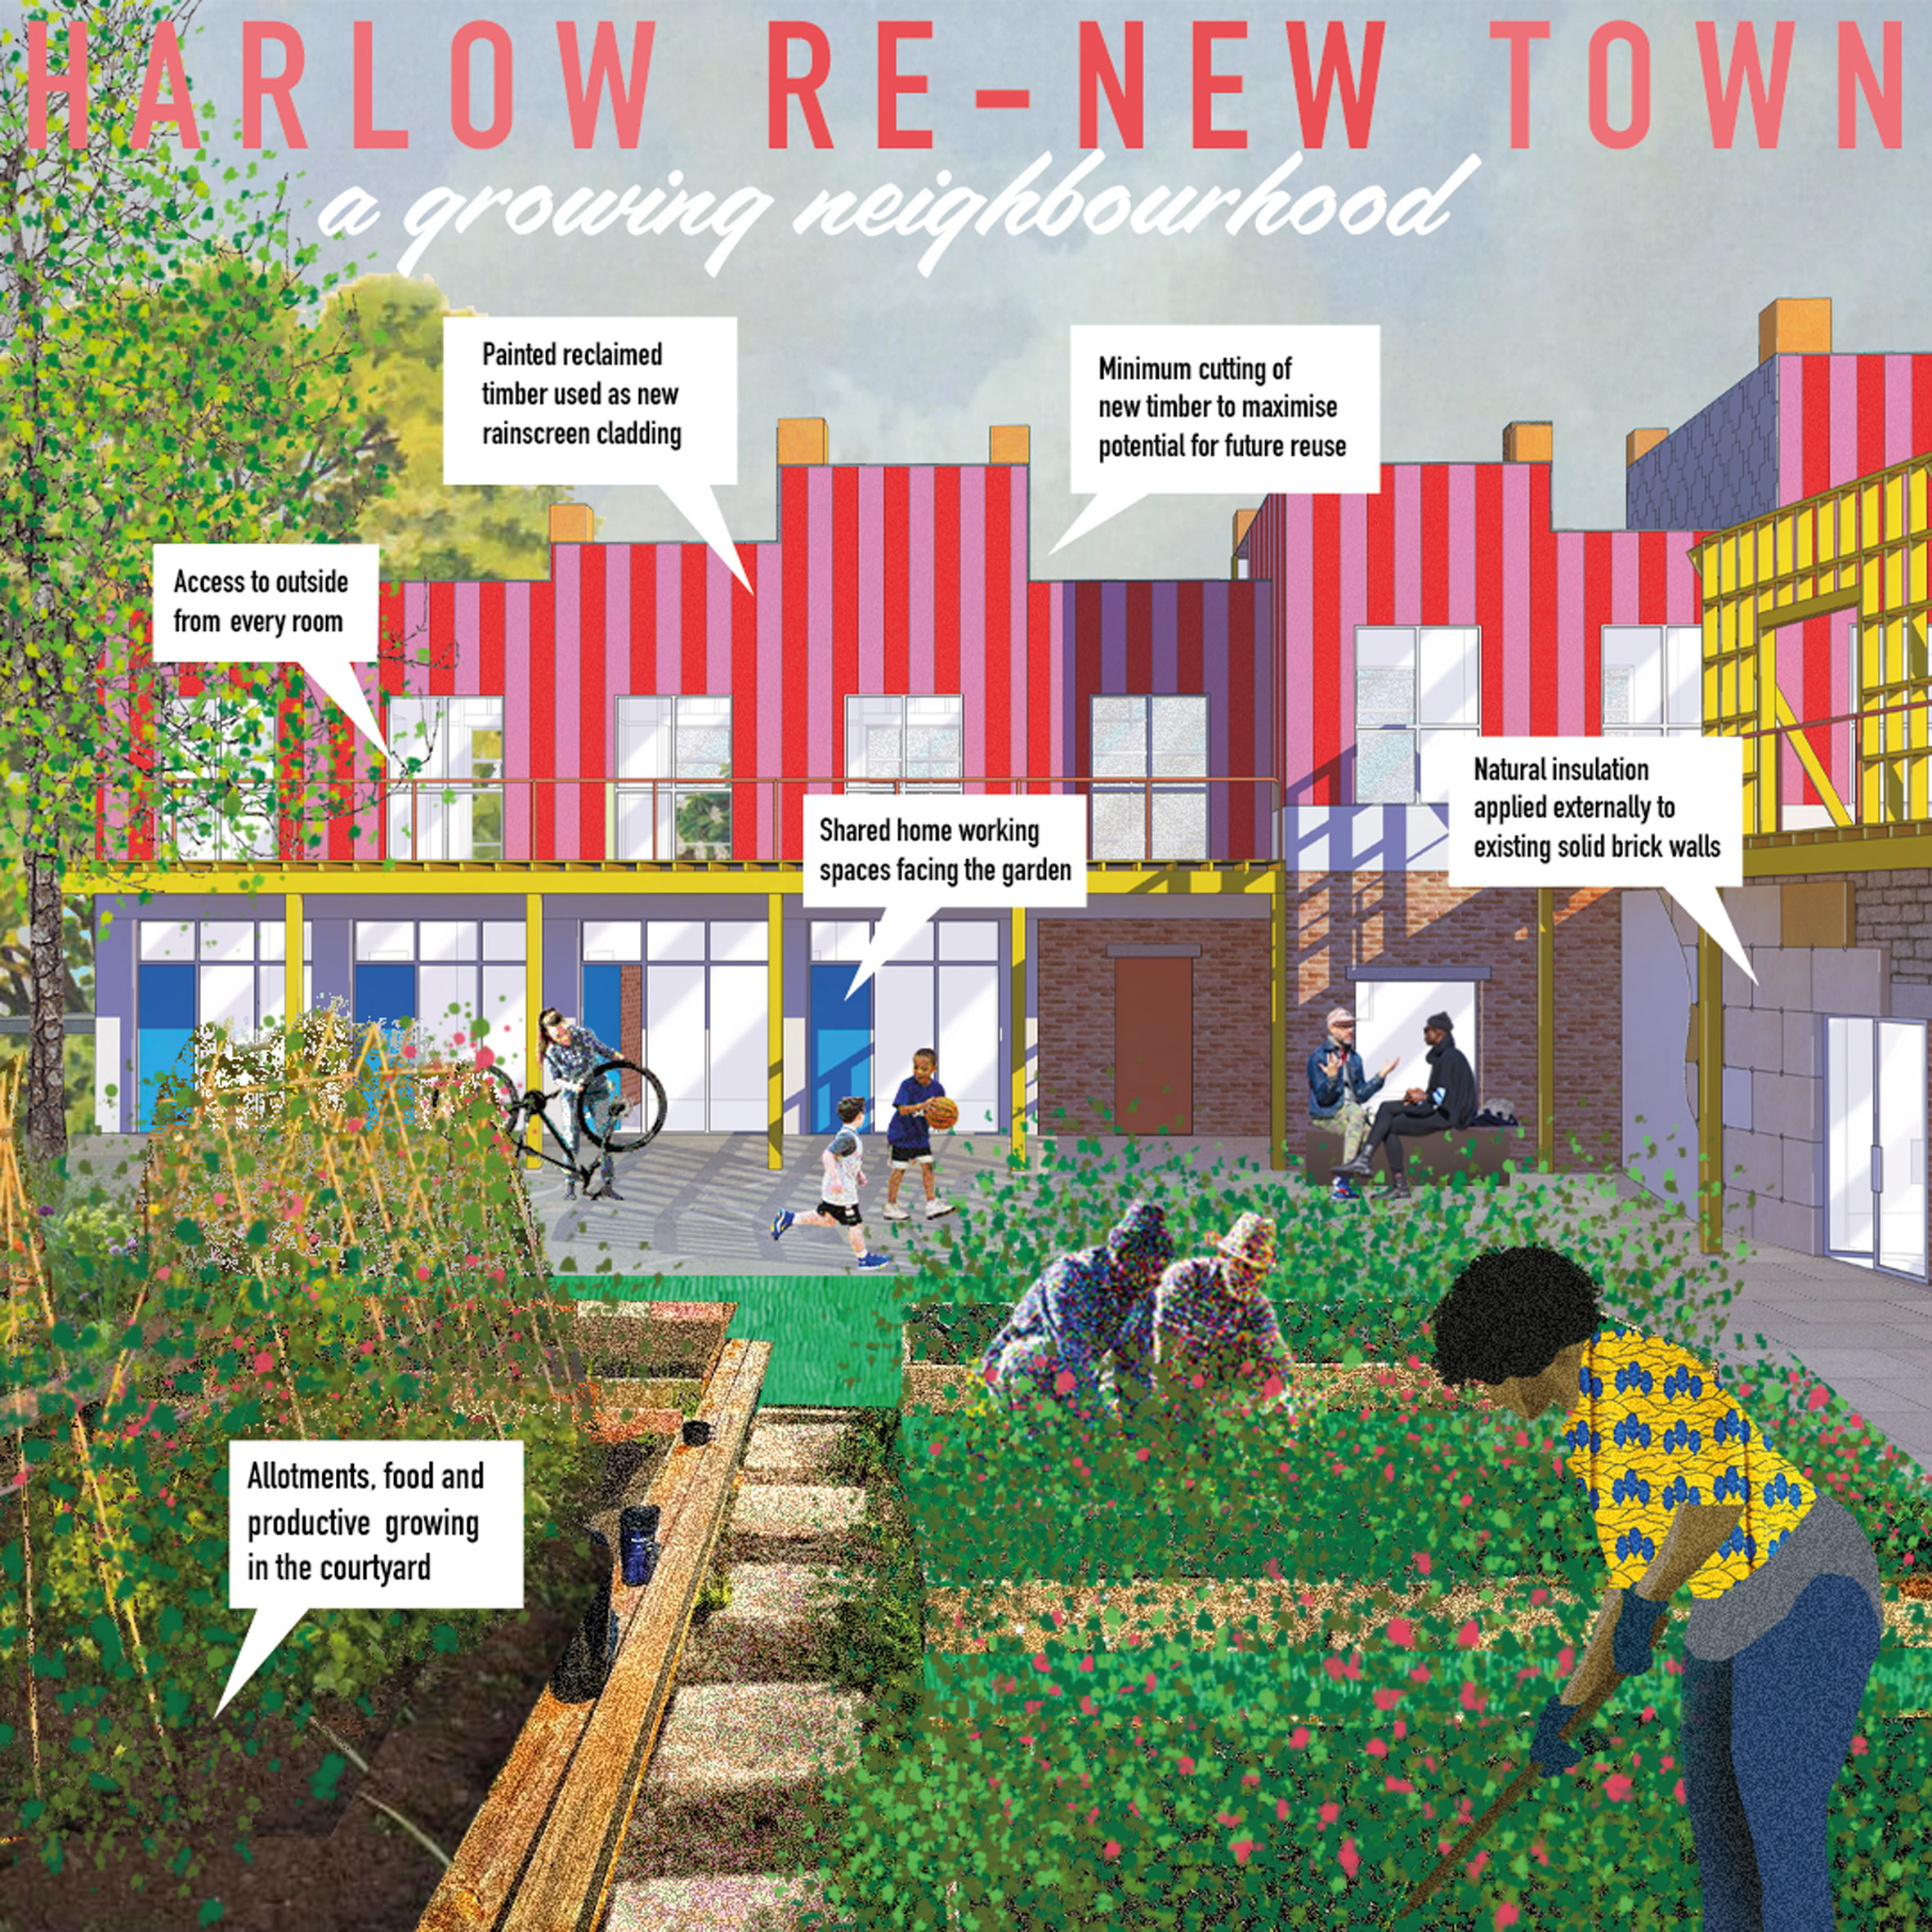 Harlow Re-New Town design proposal